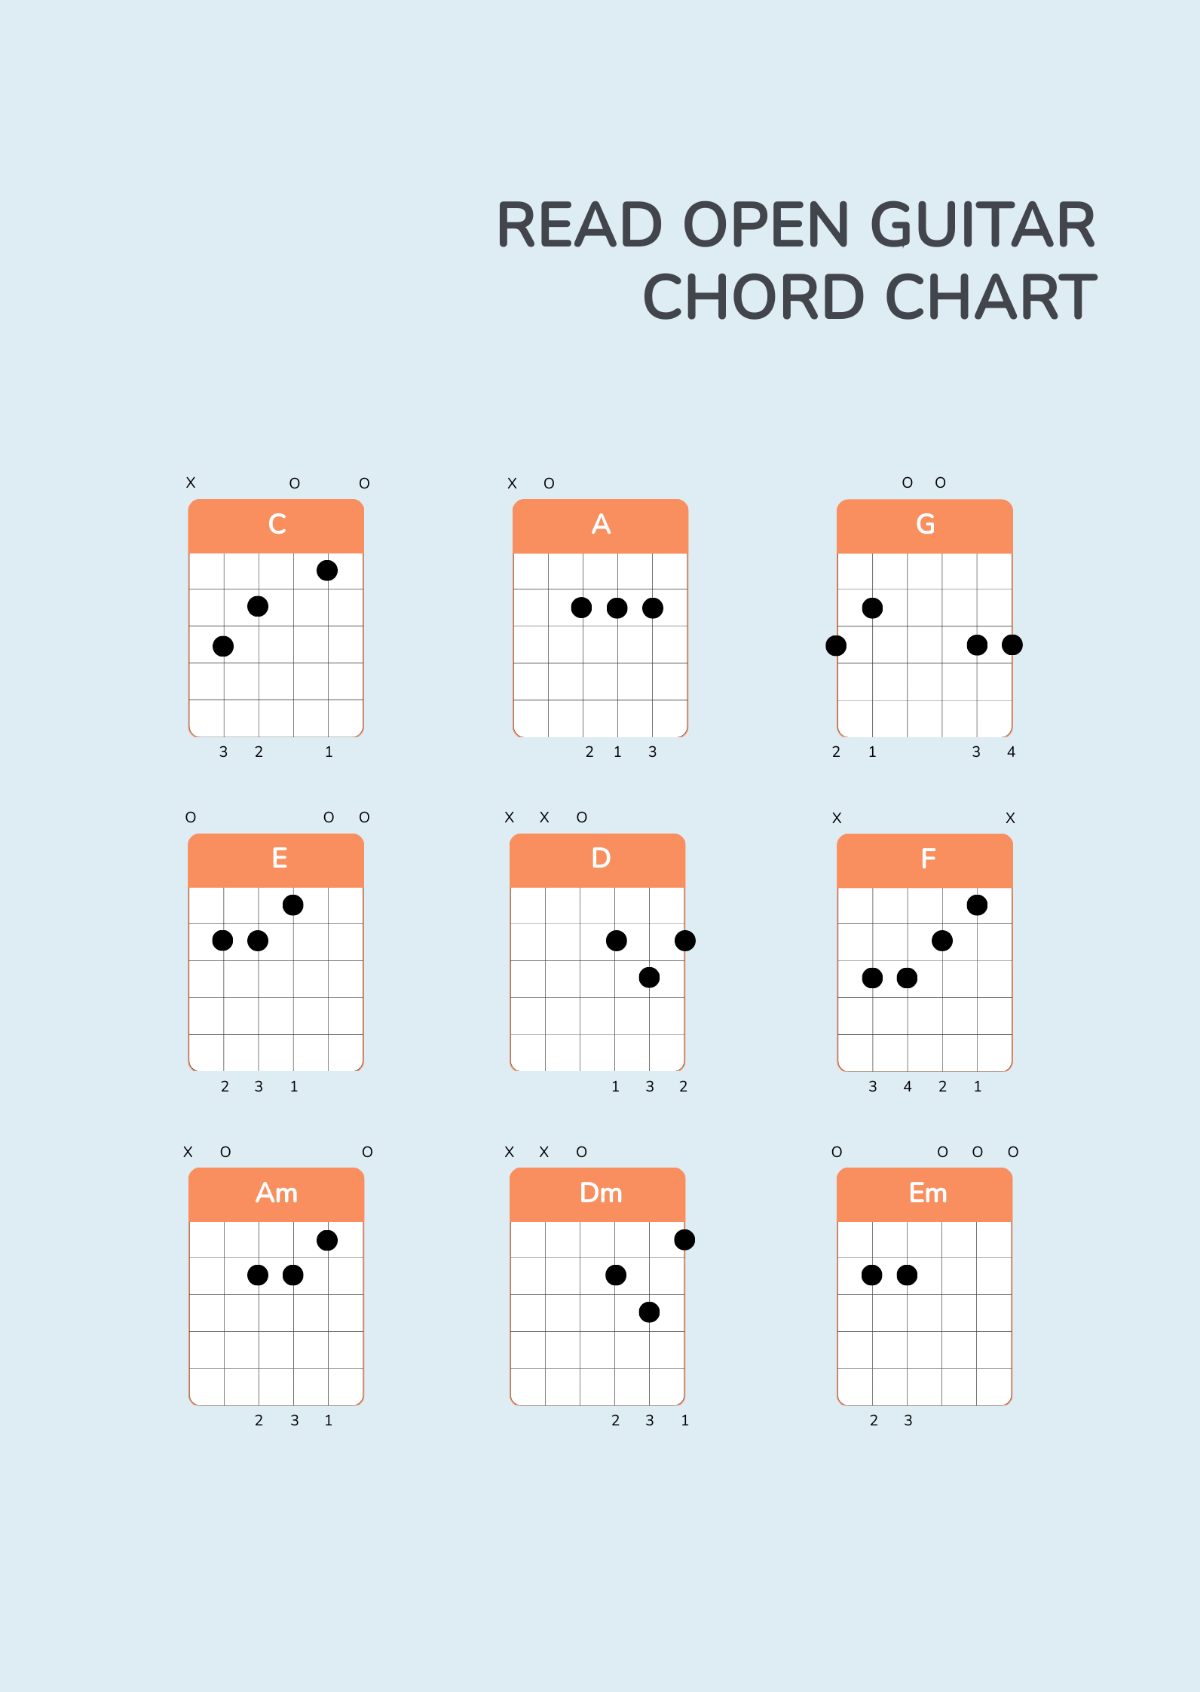 Free Read Open Guitar Chord Chart Template